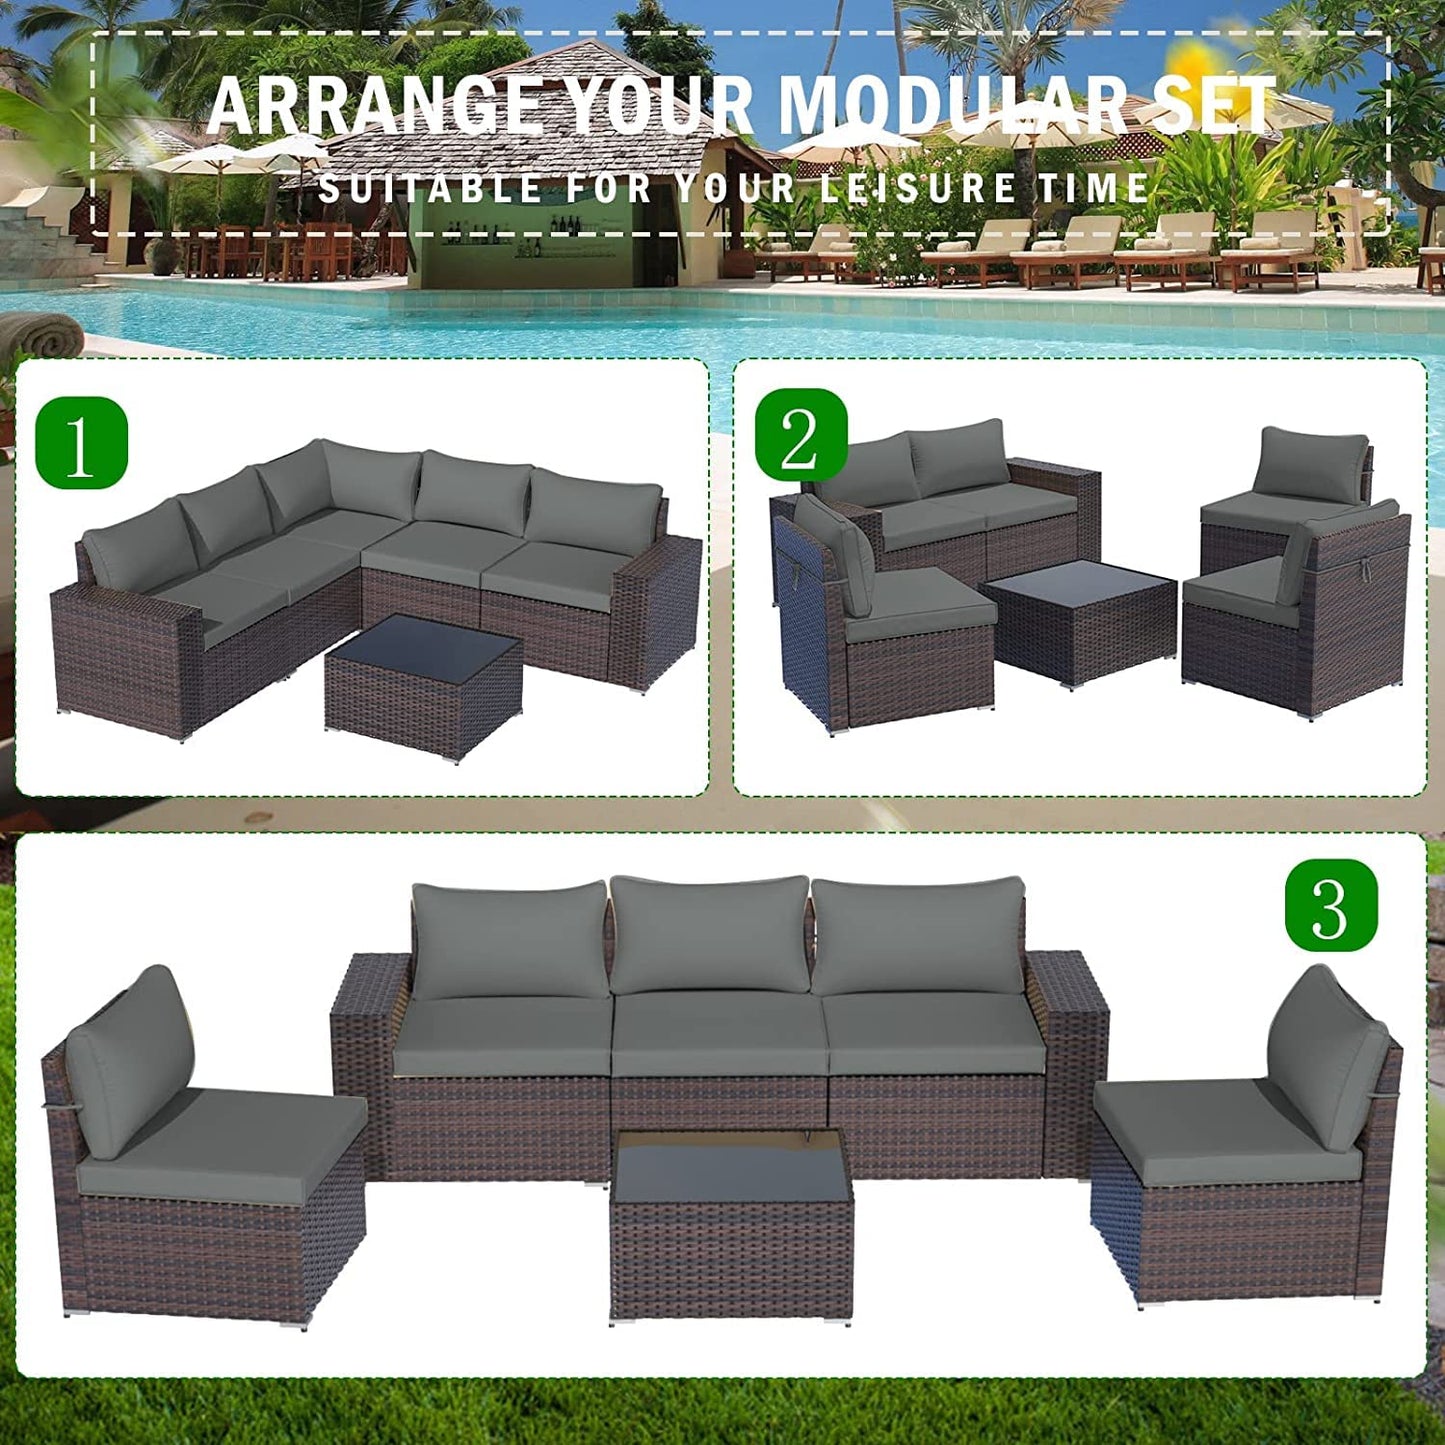 ALAULM Patio Furniture Sets 6 Pieces Patio Sectional Outdoor Furniture Patio Sofa Chairs Set - Grey